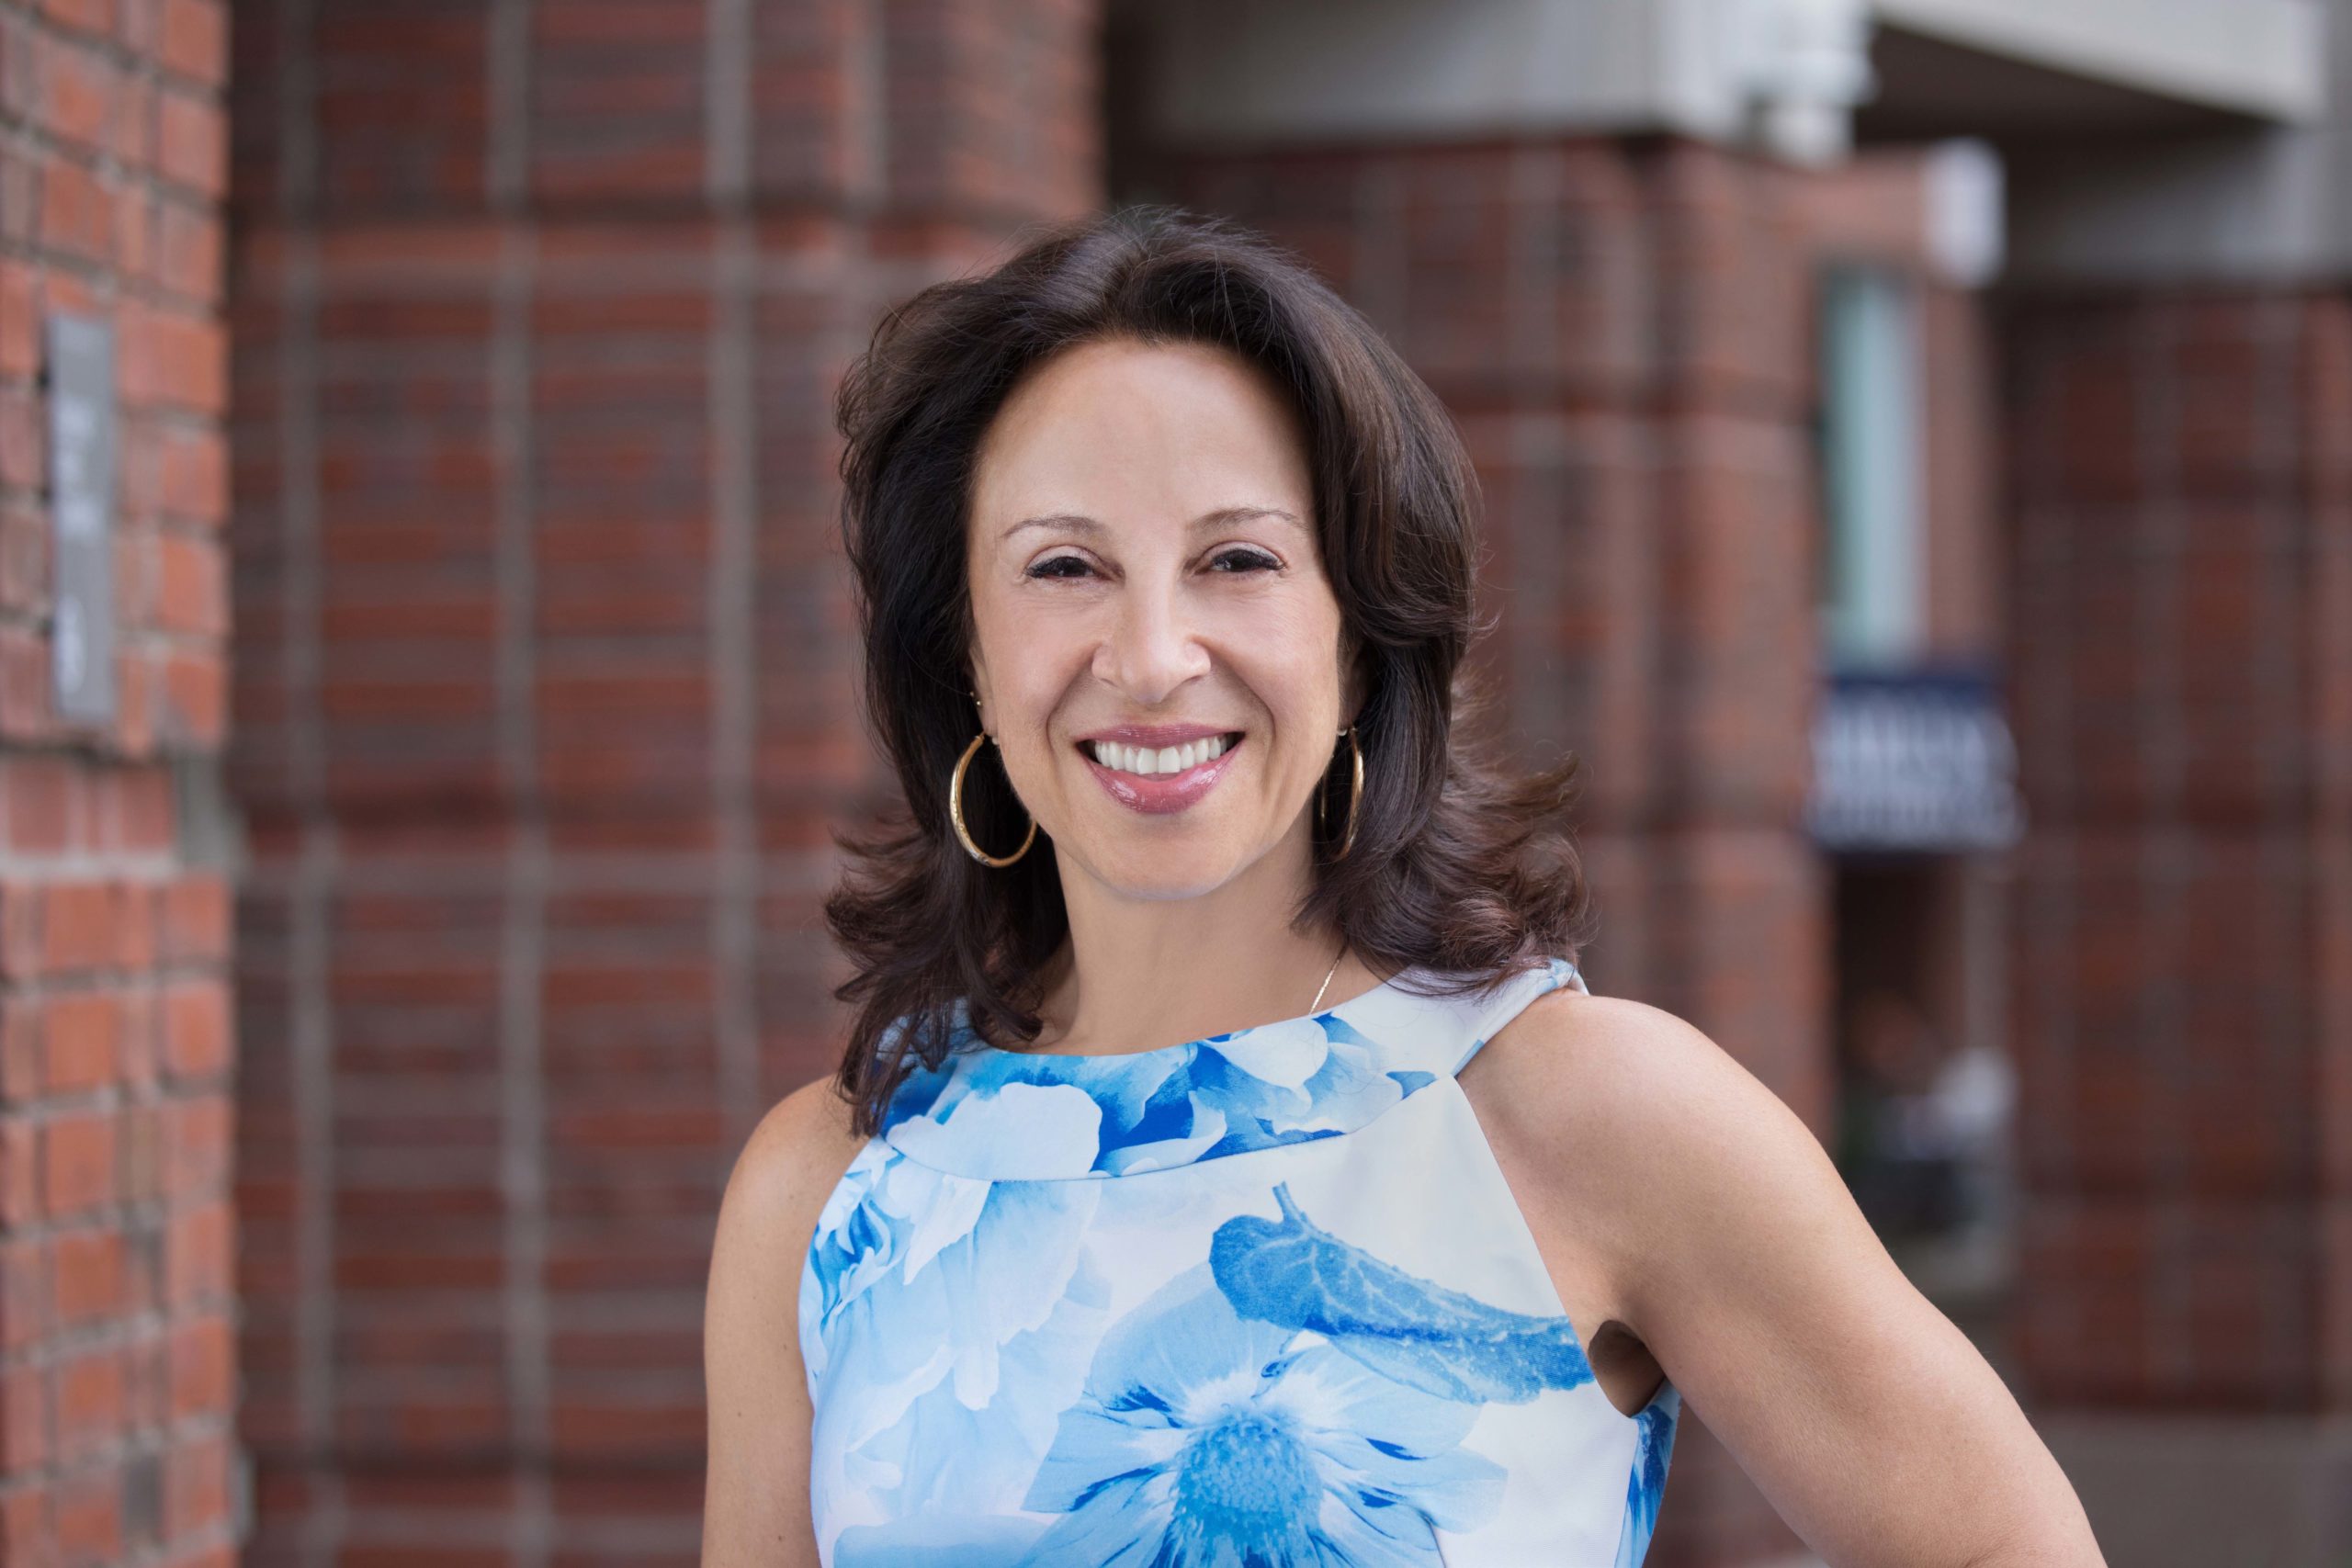 Maria Hinojosa in front of a brick building wearing a light blue shirt.